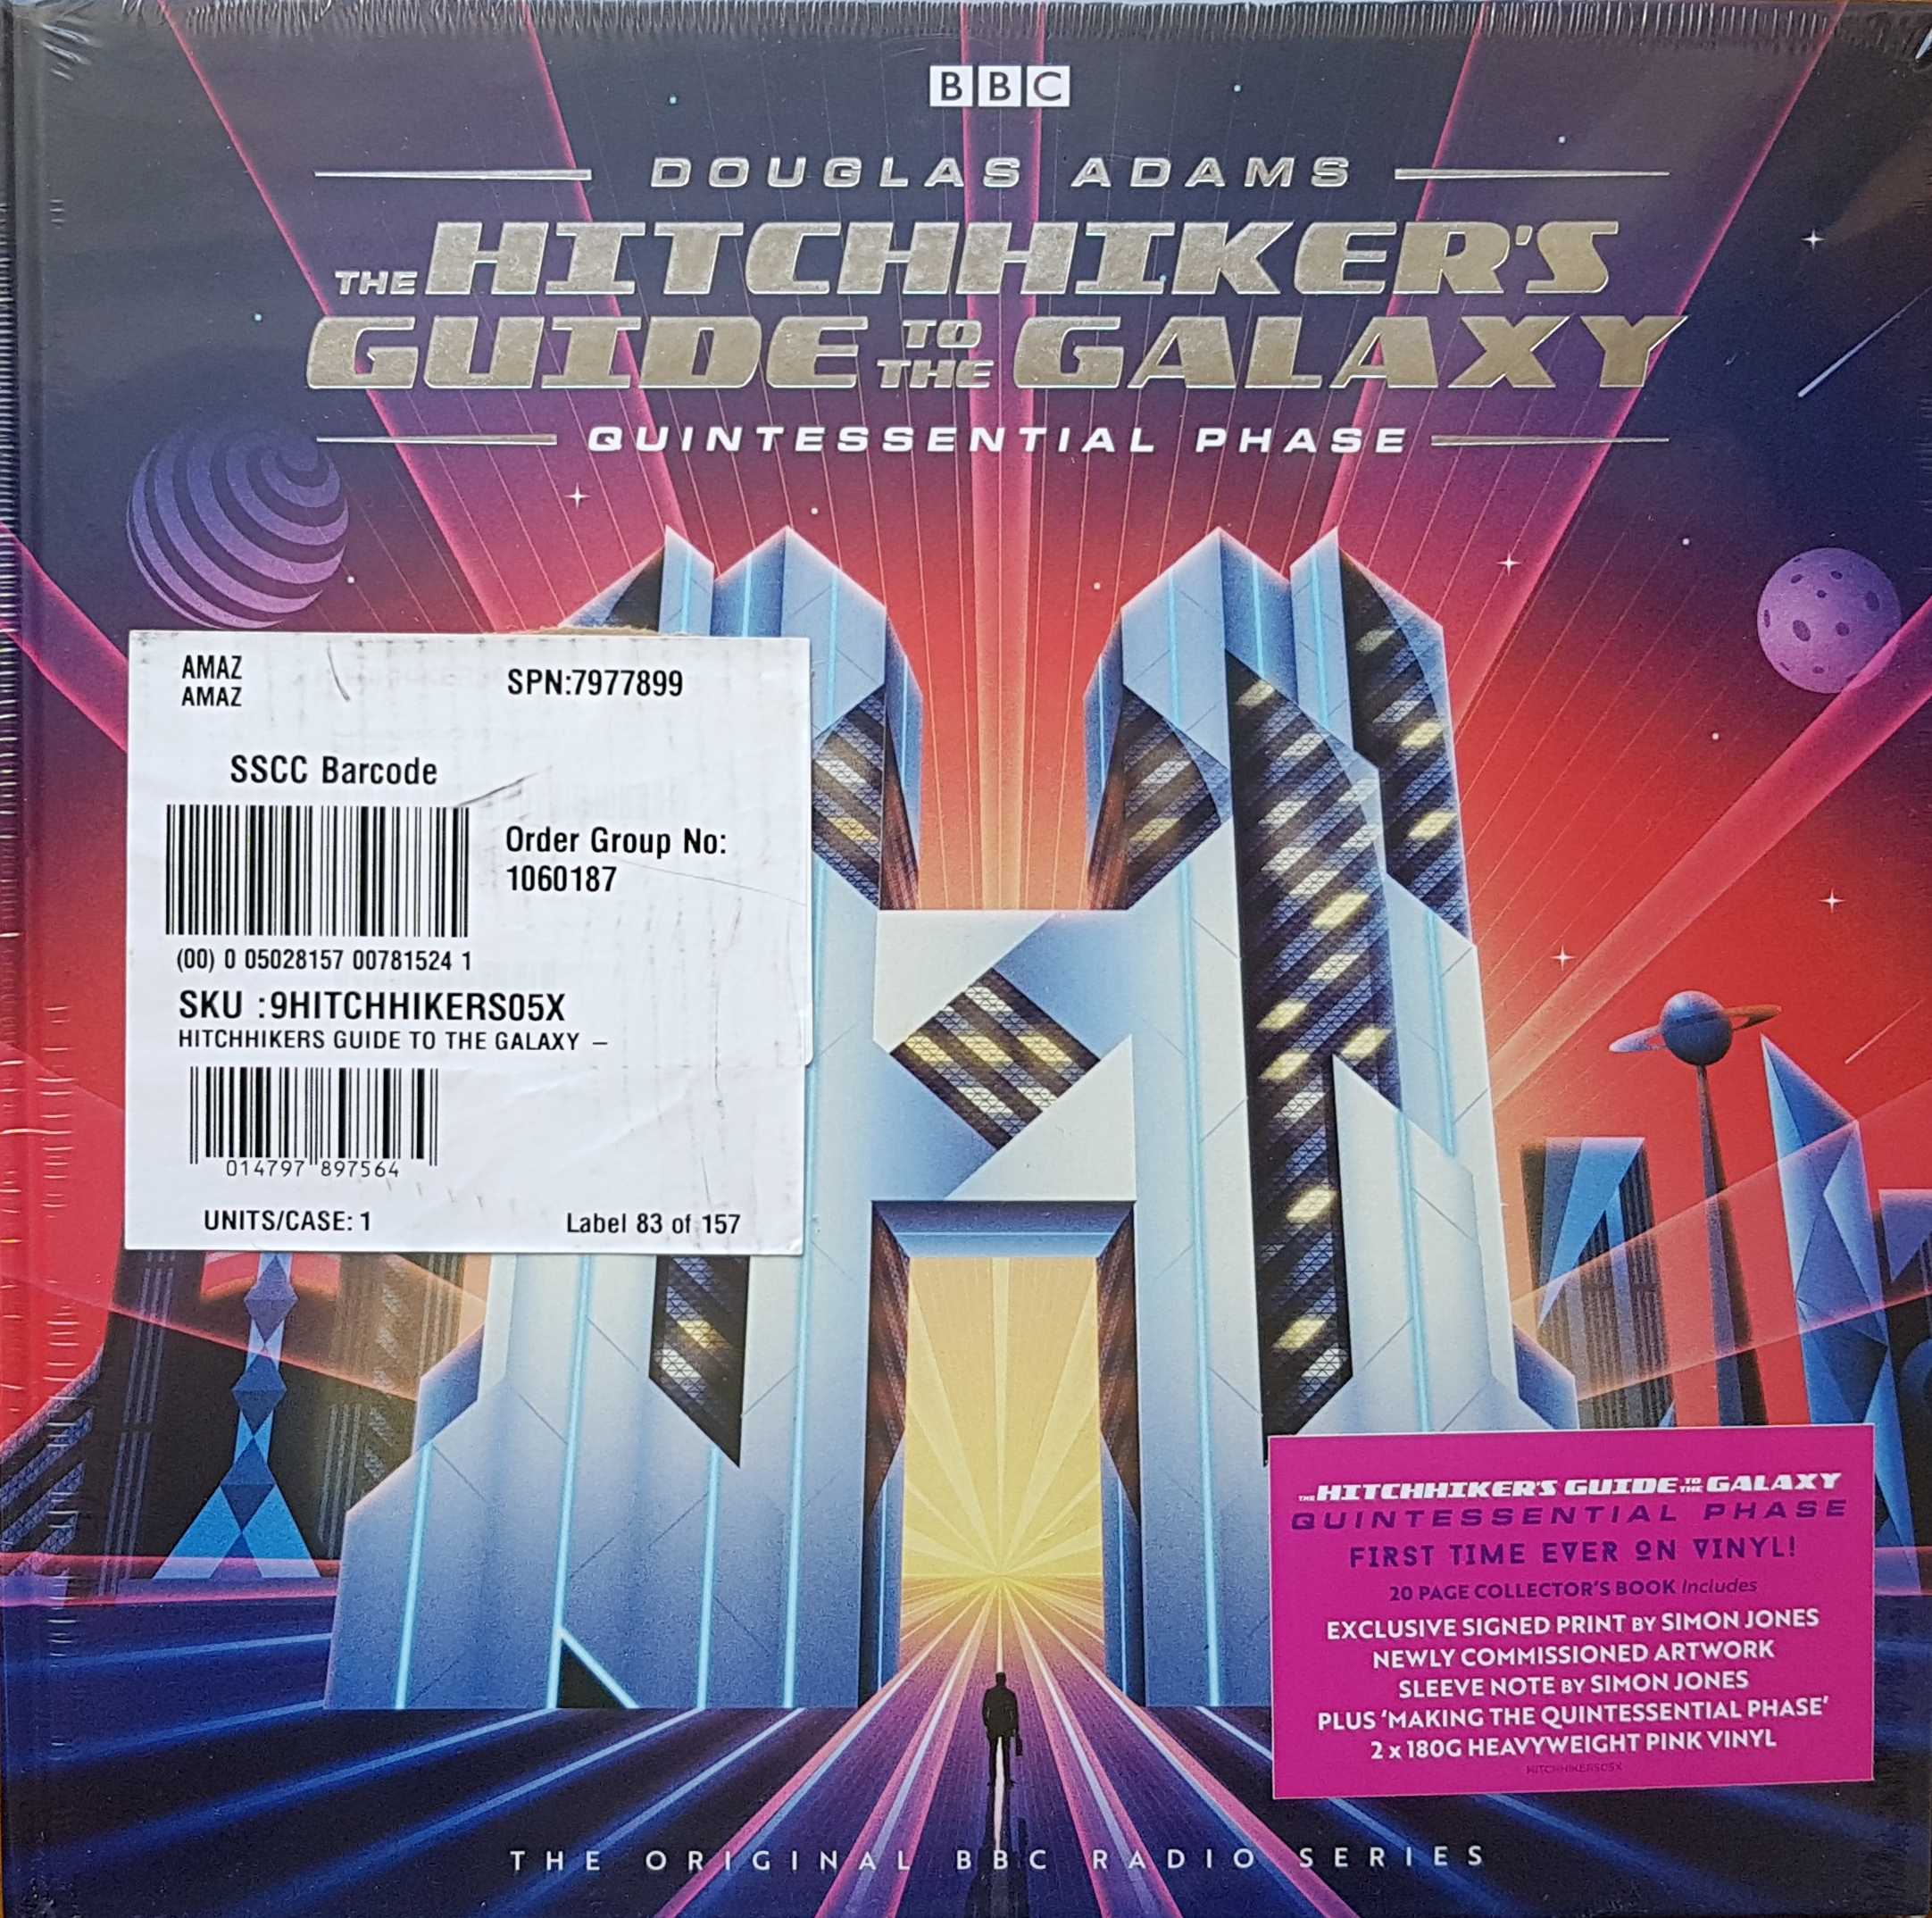 Picture of The hitch-hiker's guide to the galaxy - Quintessential phrase by artist Douglas Adams from the BBC albums - Records and Tapes library